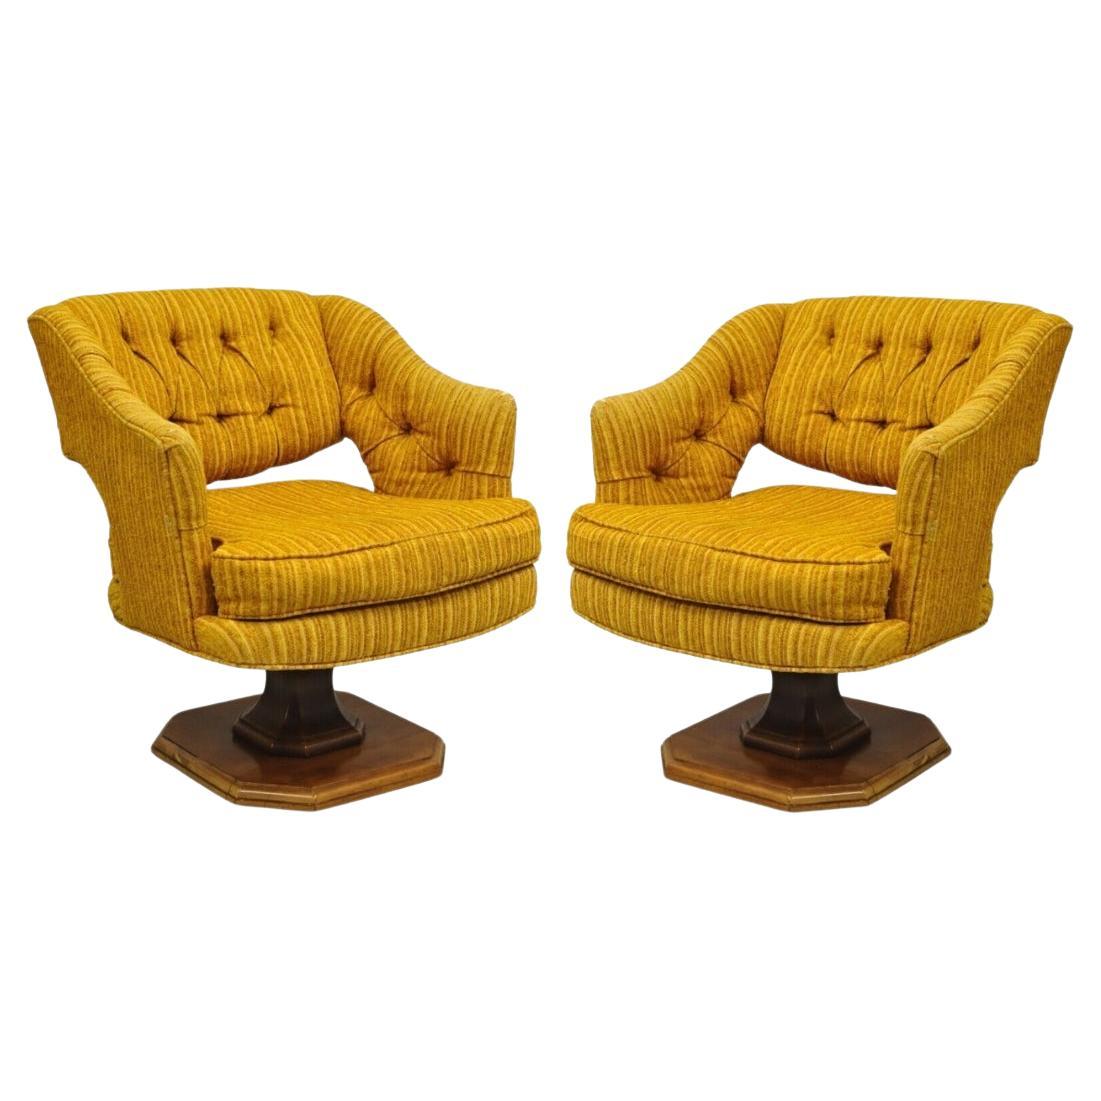 Mid Century Modern Orange Swivel Club Lounge Chairs by Silver Craft - a Pair For Sale